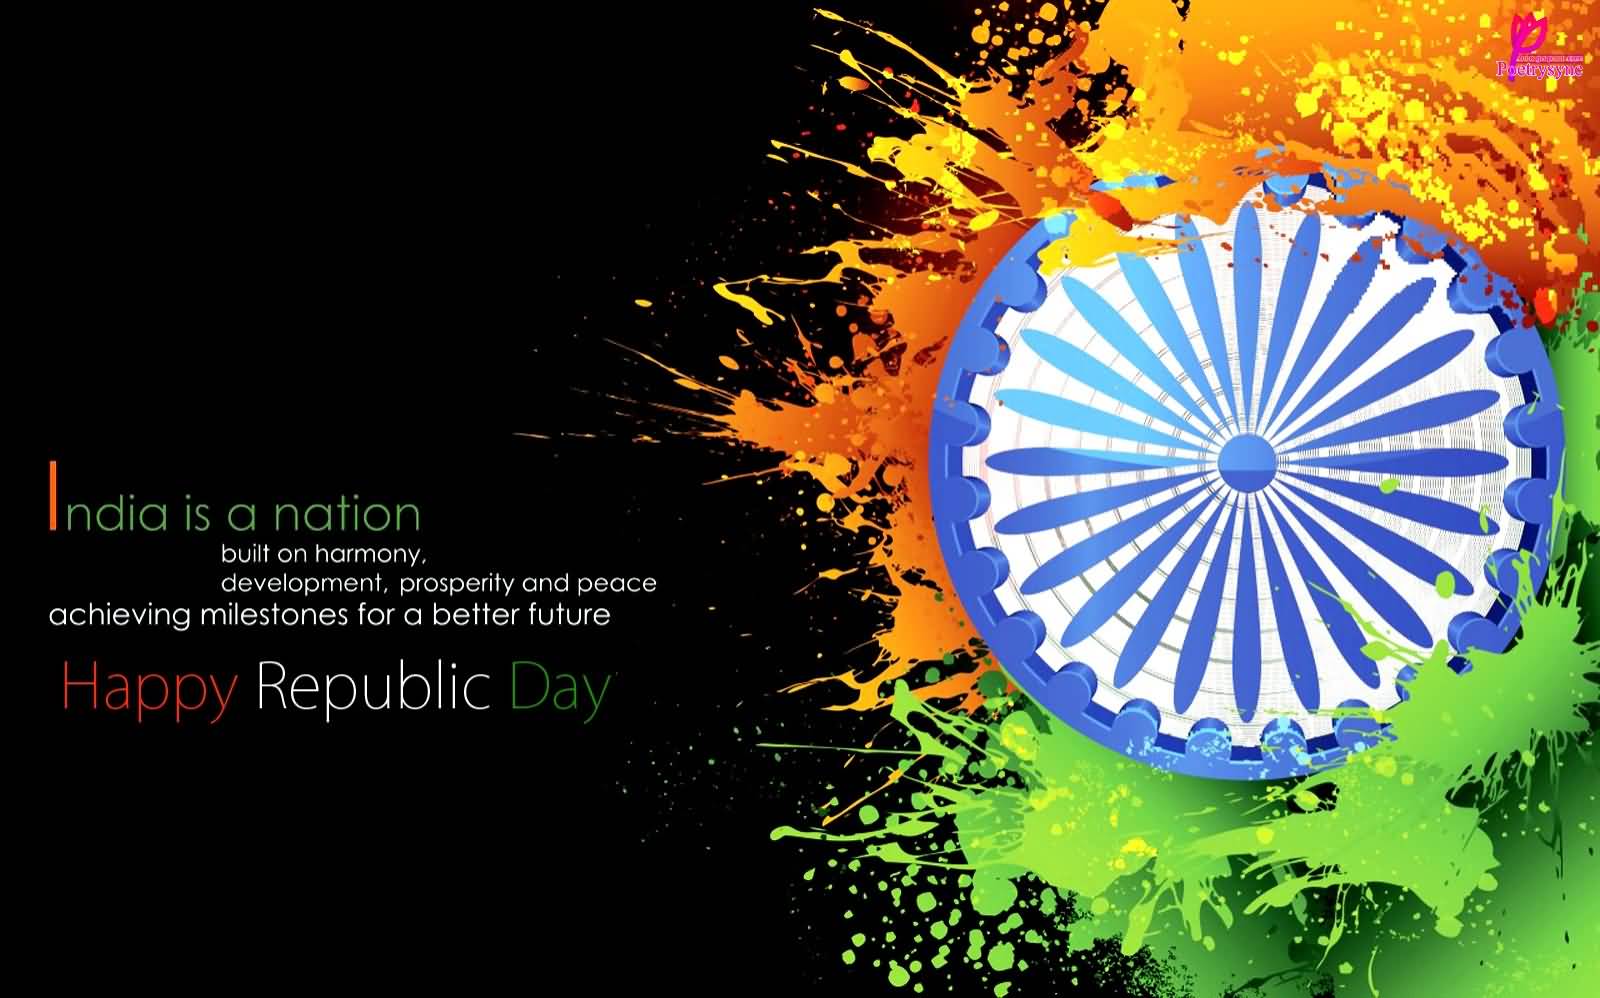 India Is A Nation Built On Harmony Development, Prosperity And Peace Achieving Milestones For A Better Future. Happy Republic Day